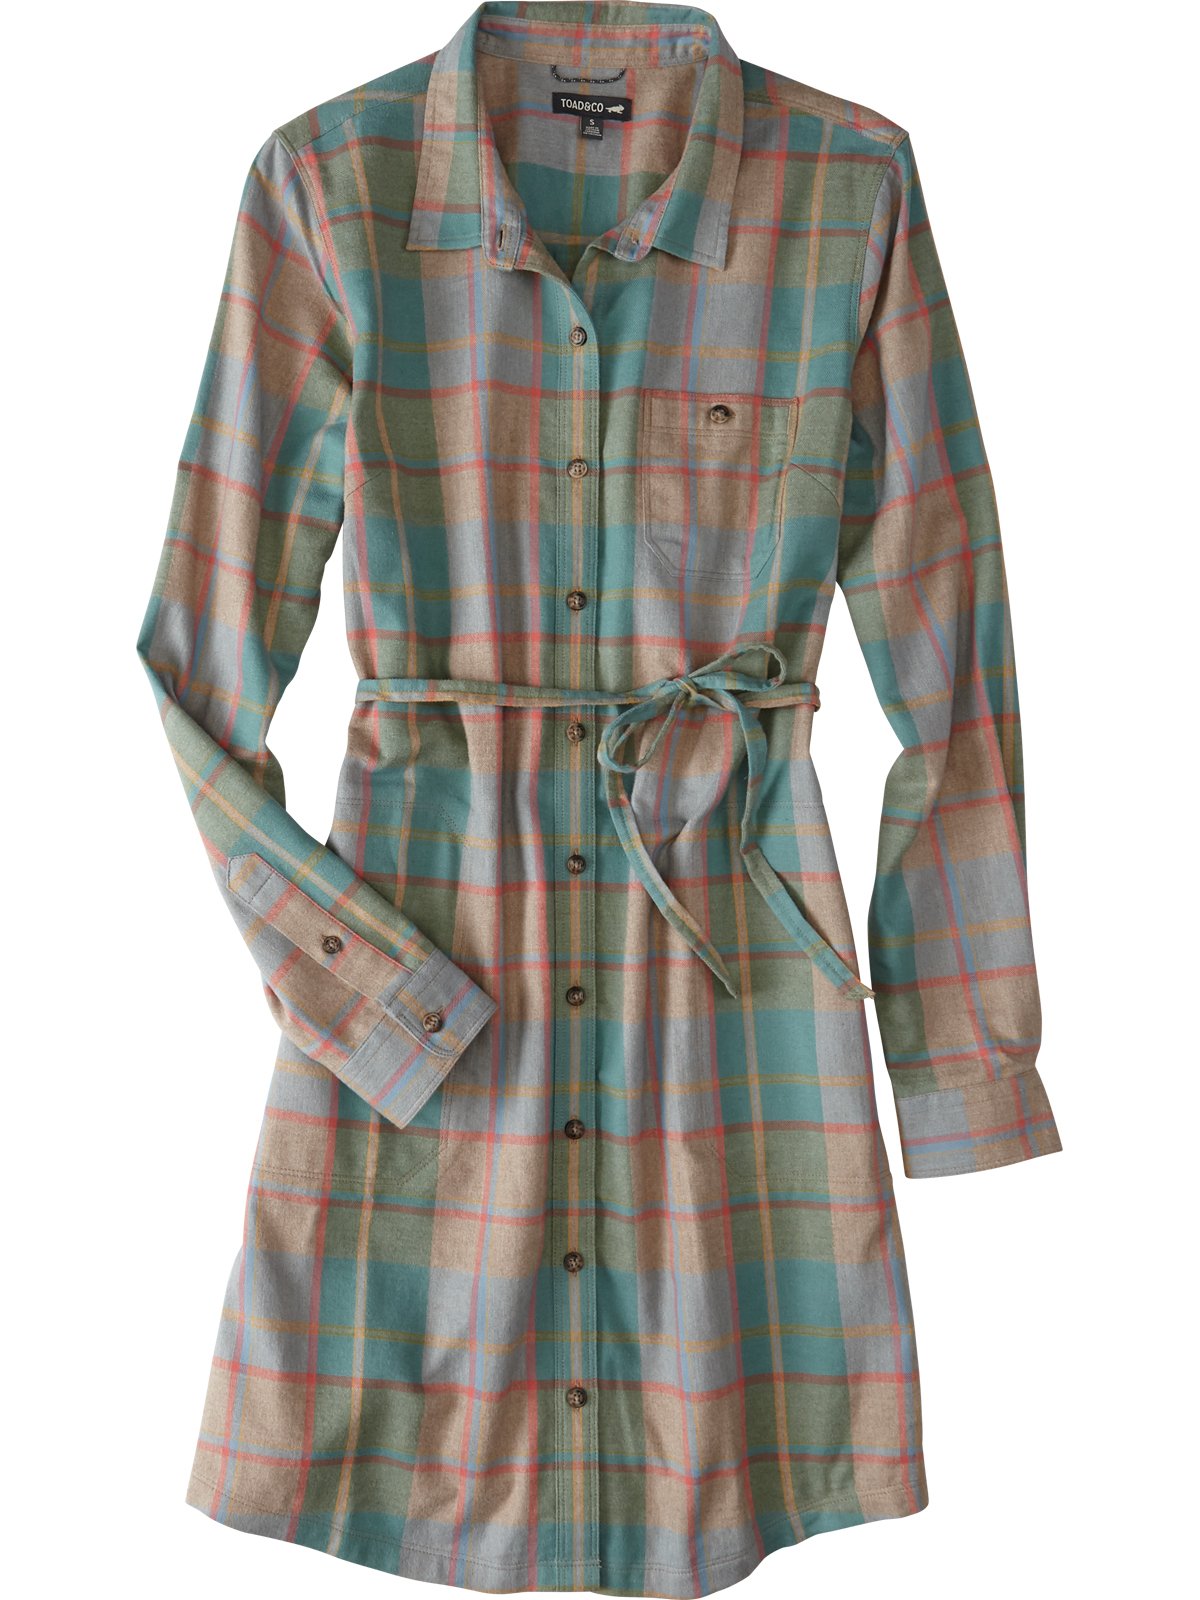 Toad&Co Flannel Shirtdress: Plaiditude